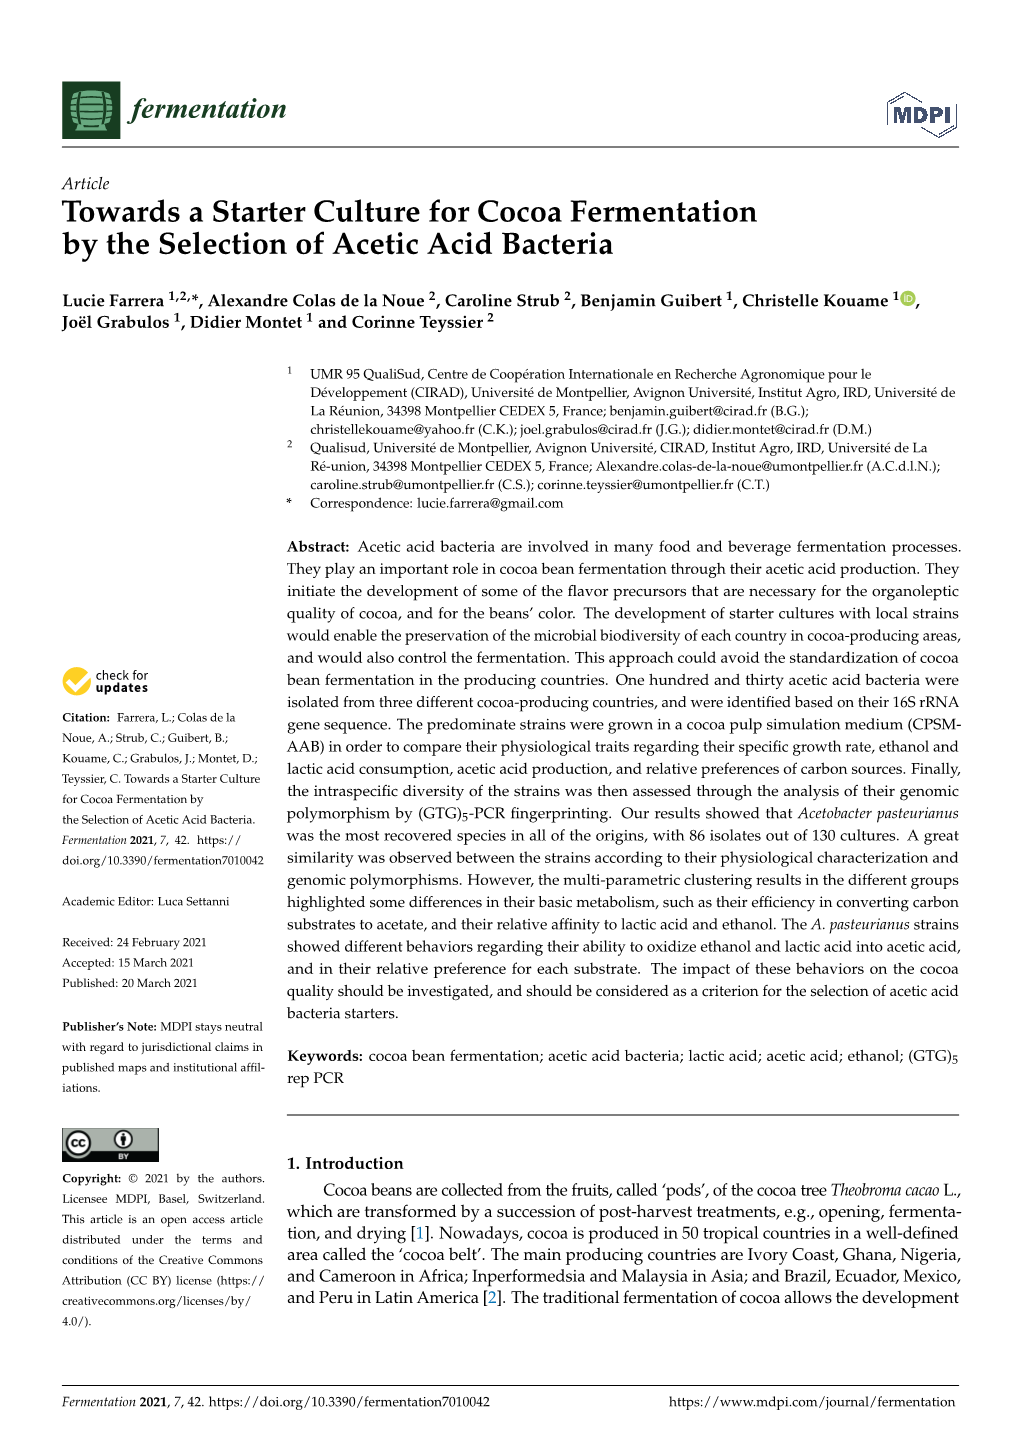 Towards a Starter Culture for Cocoa Fermentation by the Selection of Acetic Acid Bacteria